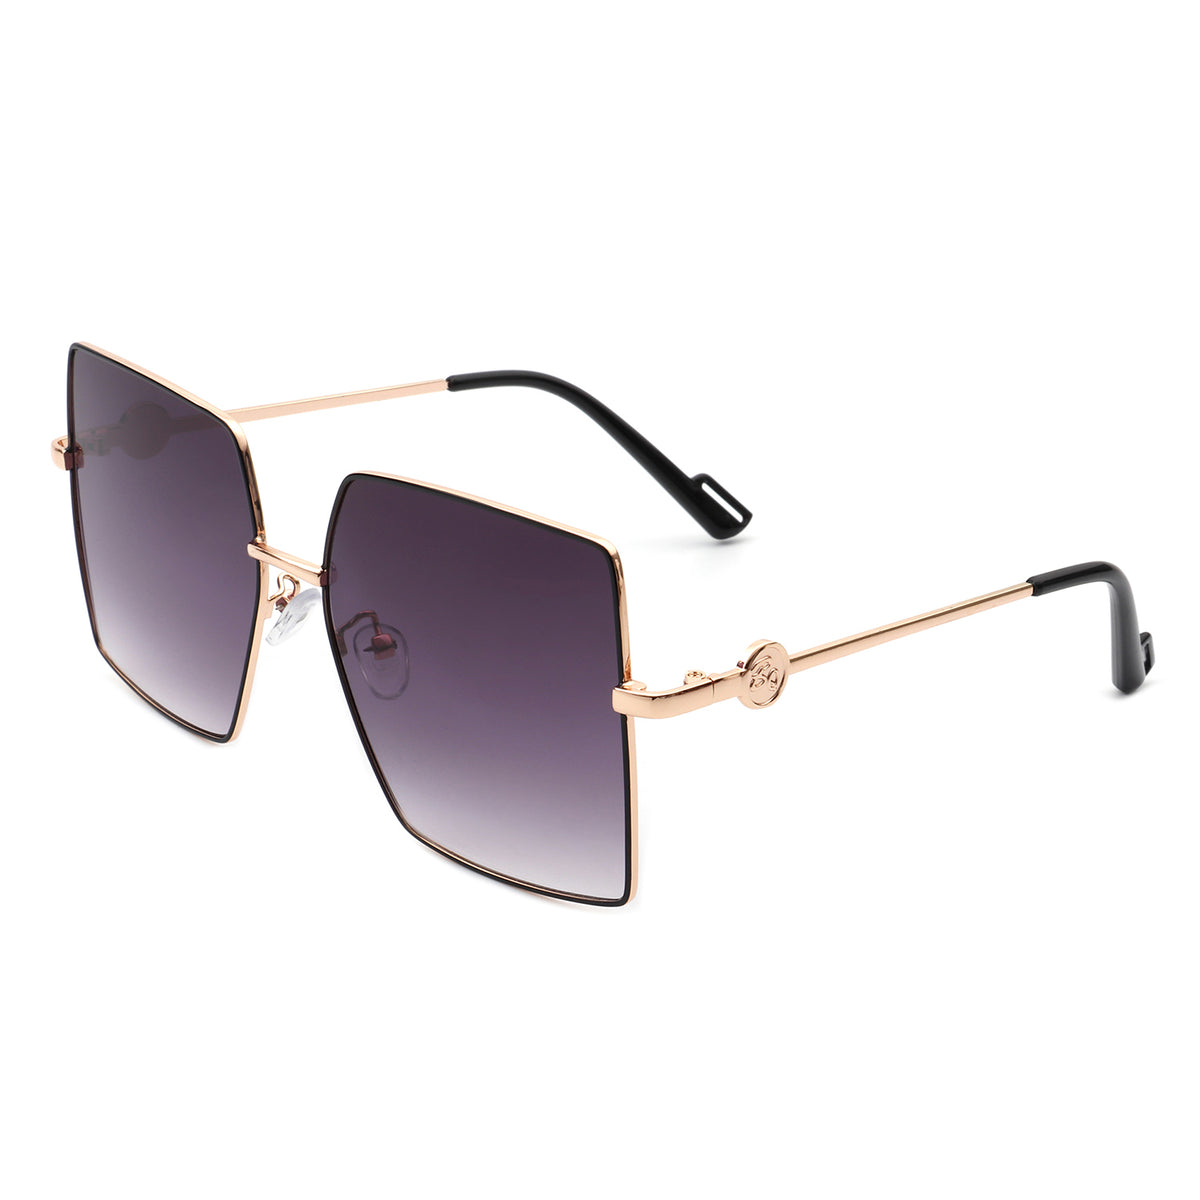 Tinted Square Oversize Flat Top Sunglasses